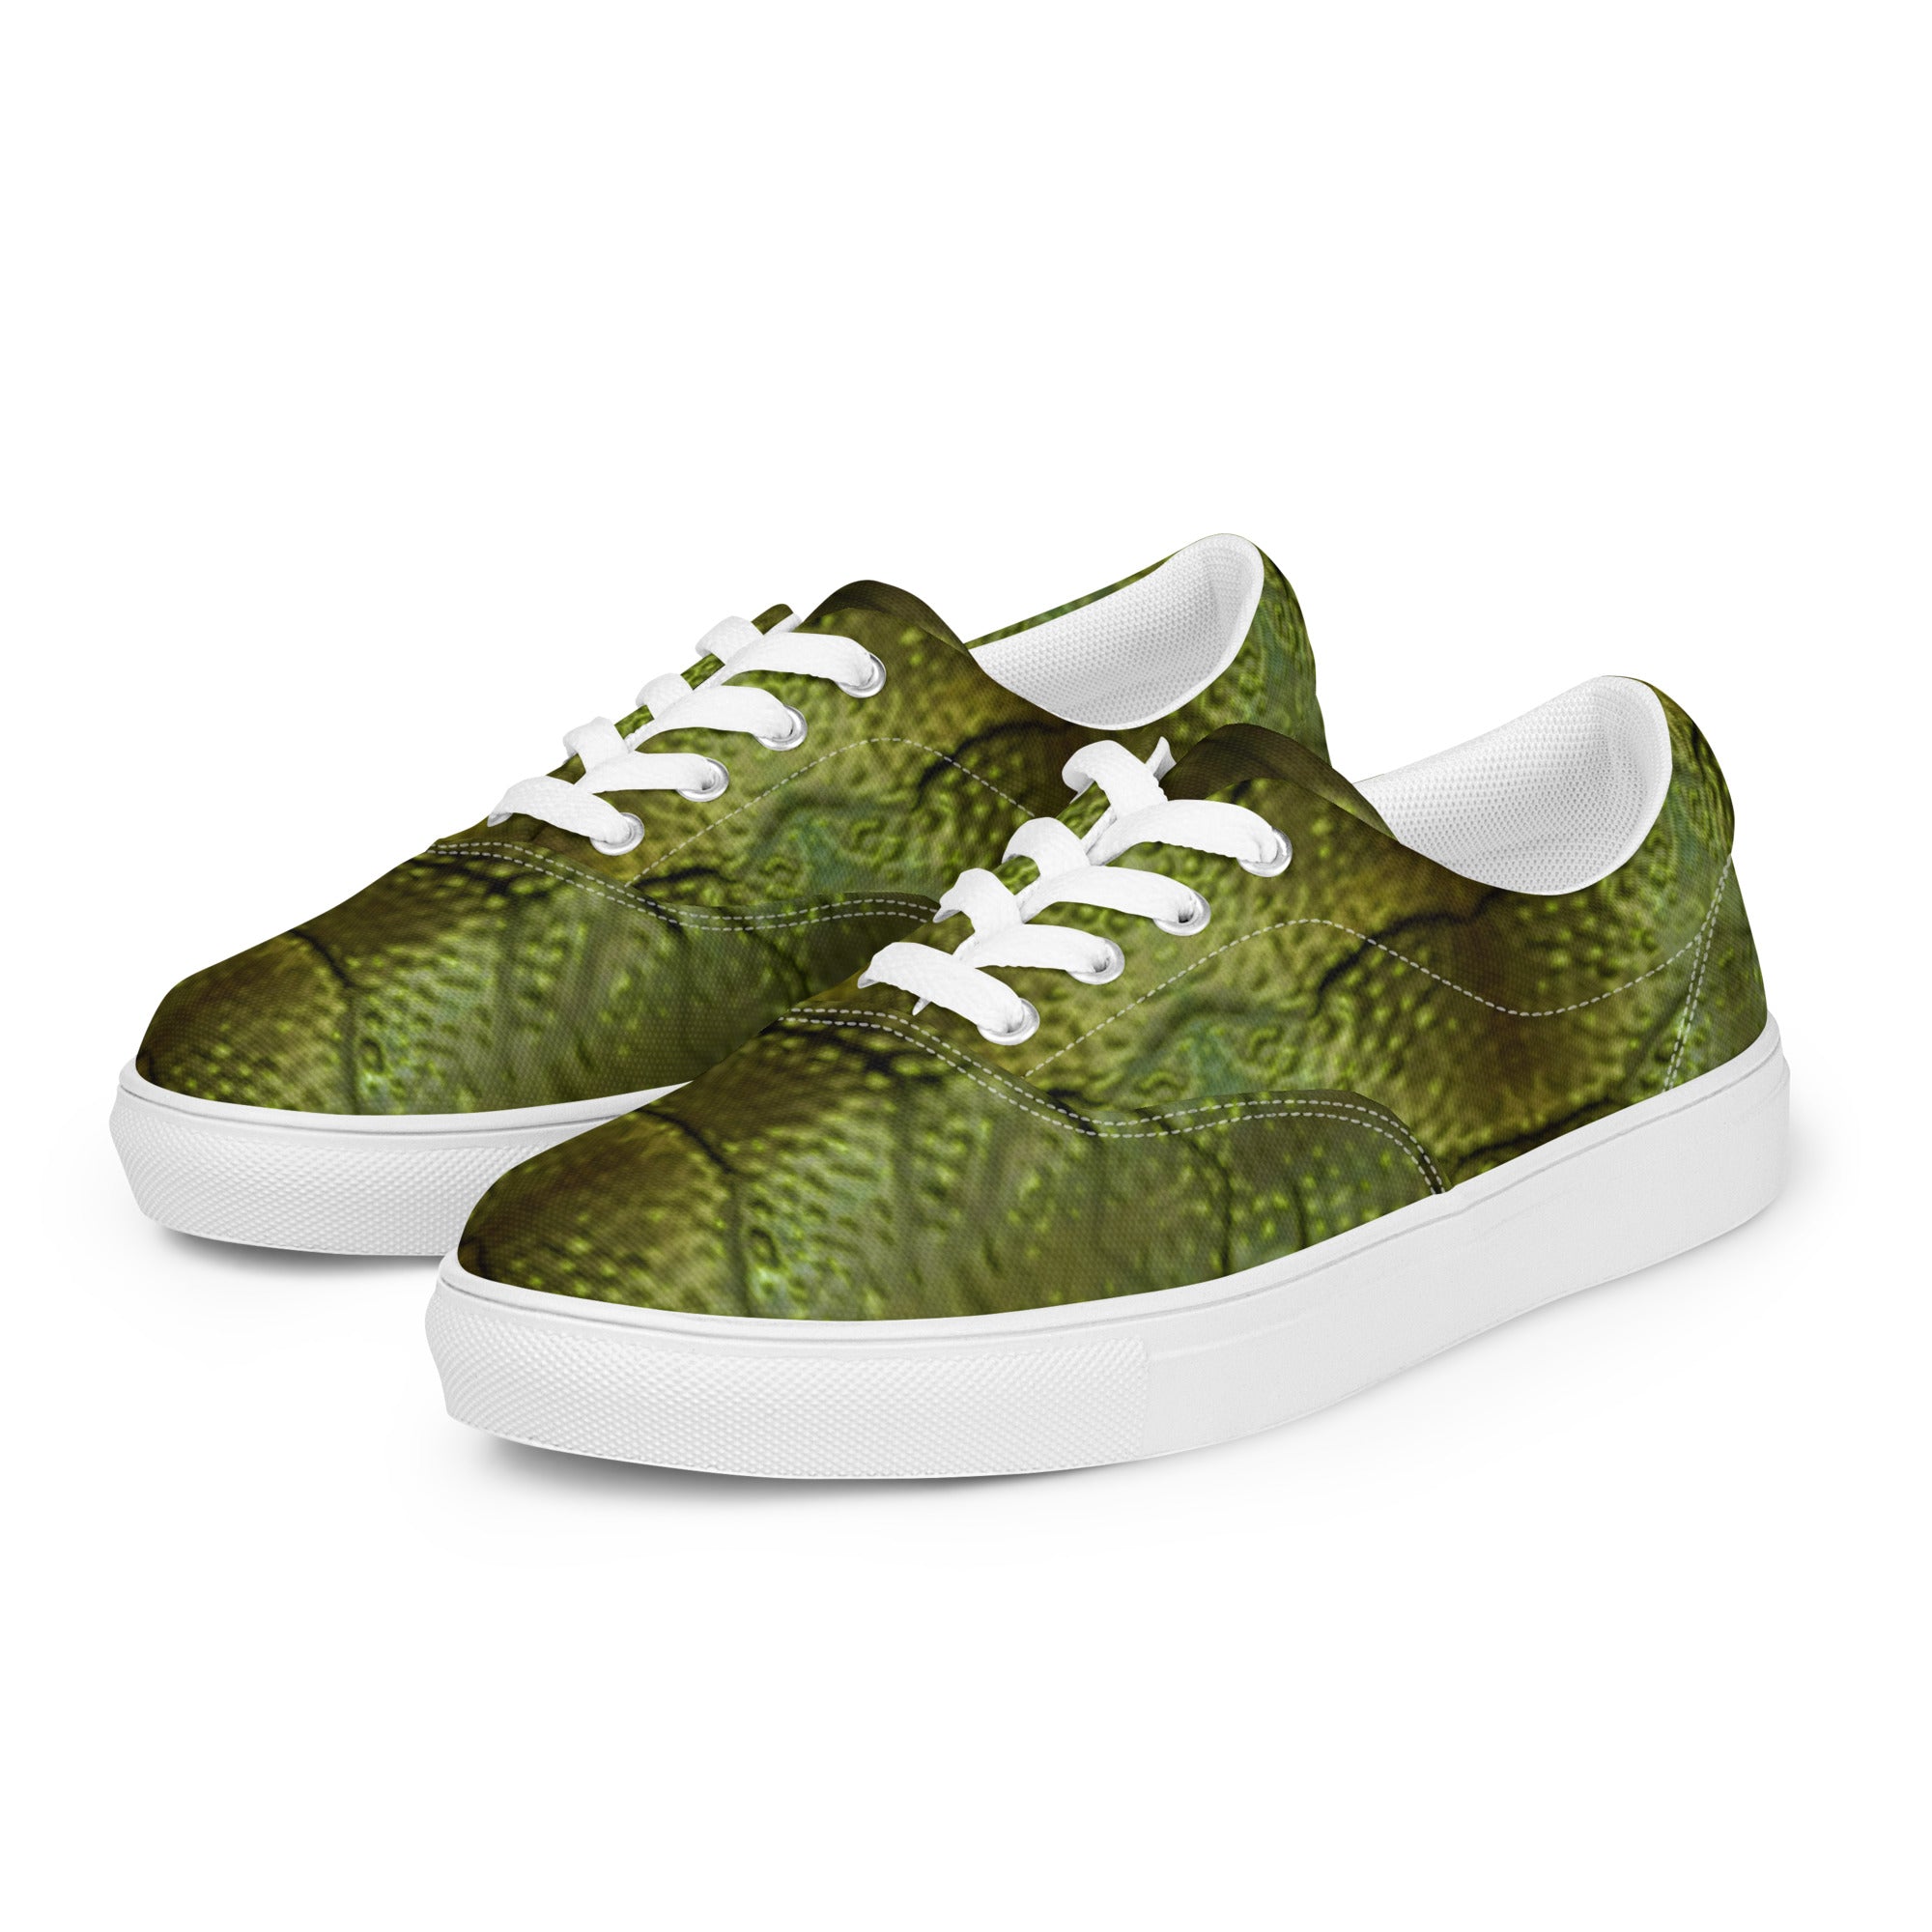 Creature from the Black Lagoon Inspired Men’s Lace-up Canvas Shoes